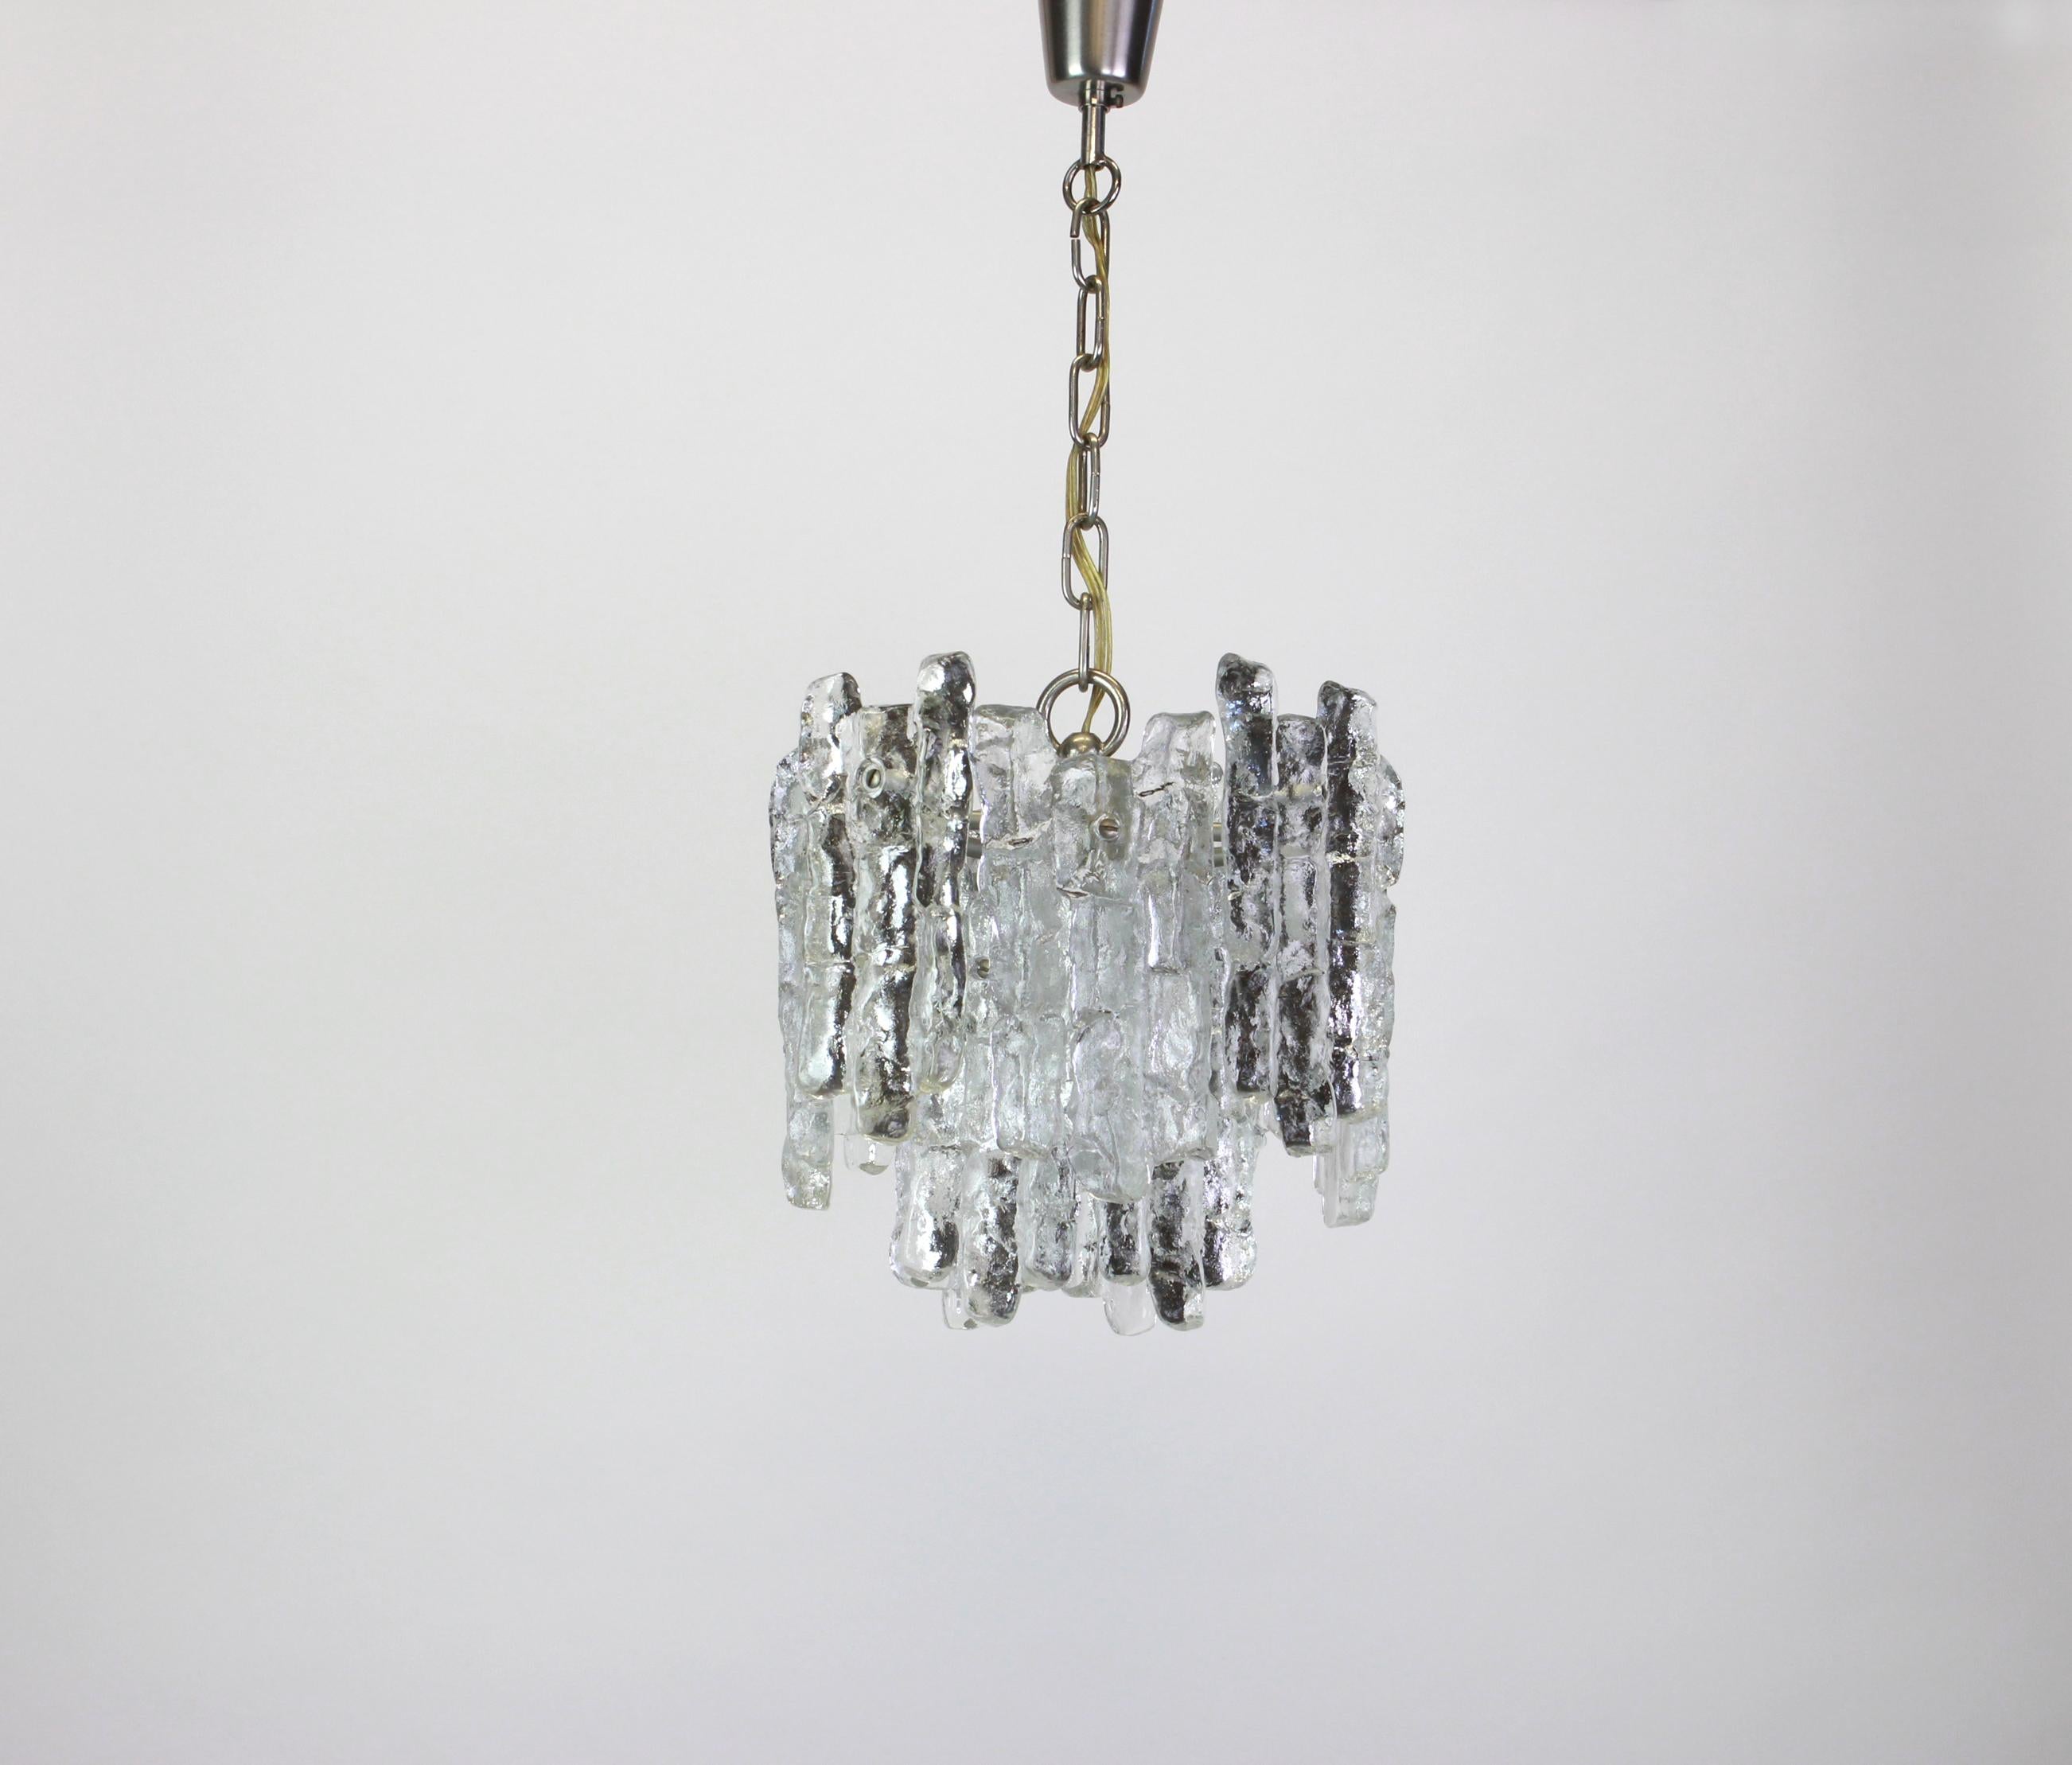 Stunning pair of Murano glass pendants by Kalmar, 1960s.
Two tiers structure gathering 12 structured glasses, beautifully refracting the light very heavy quality.

Heavy quality and in very good condition. Cleaned, well-wired and ready to use.